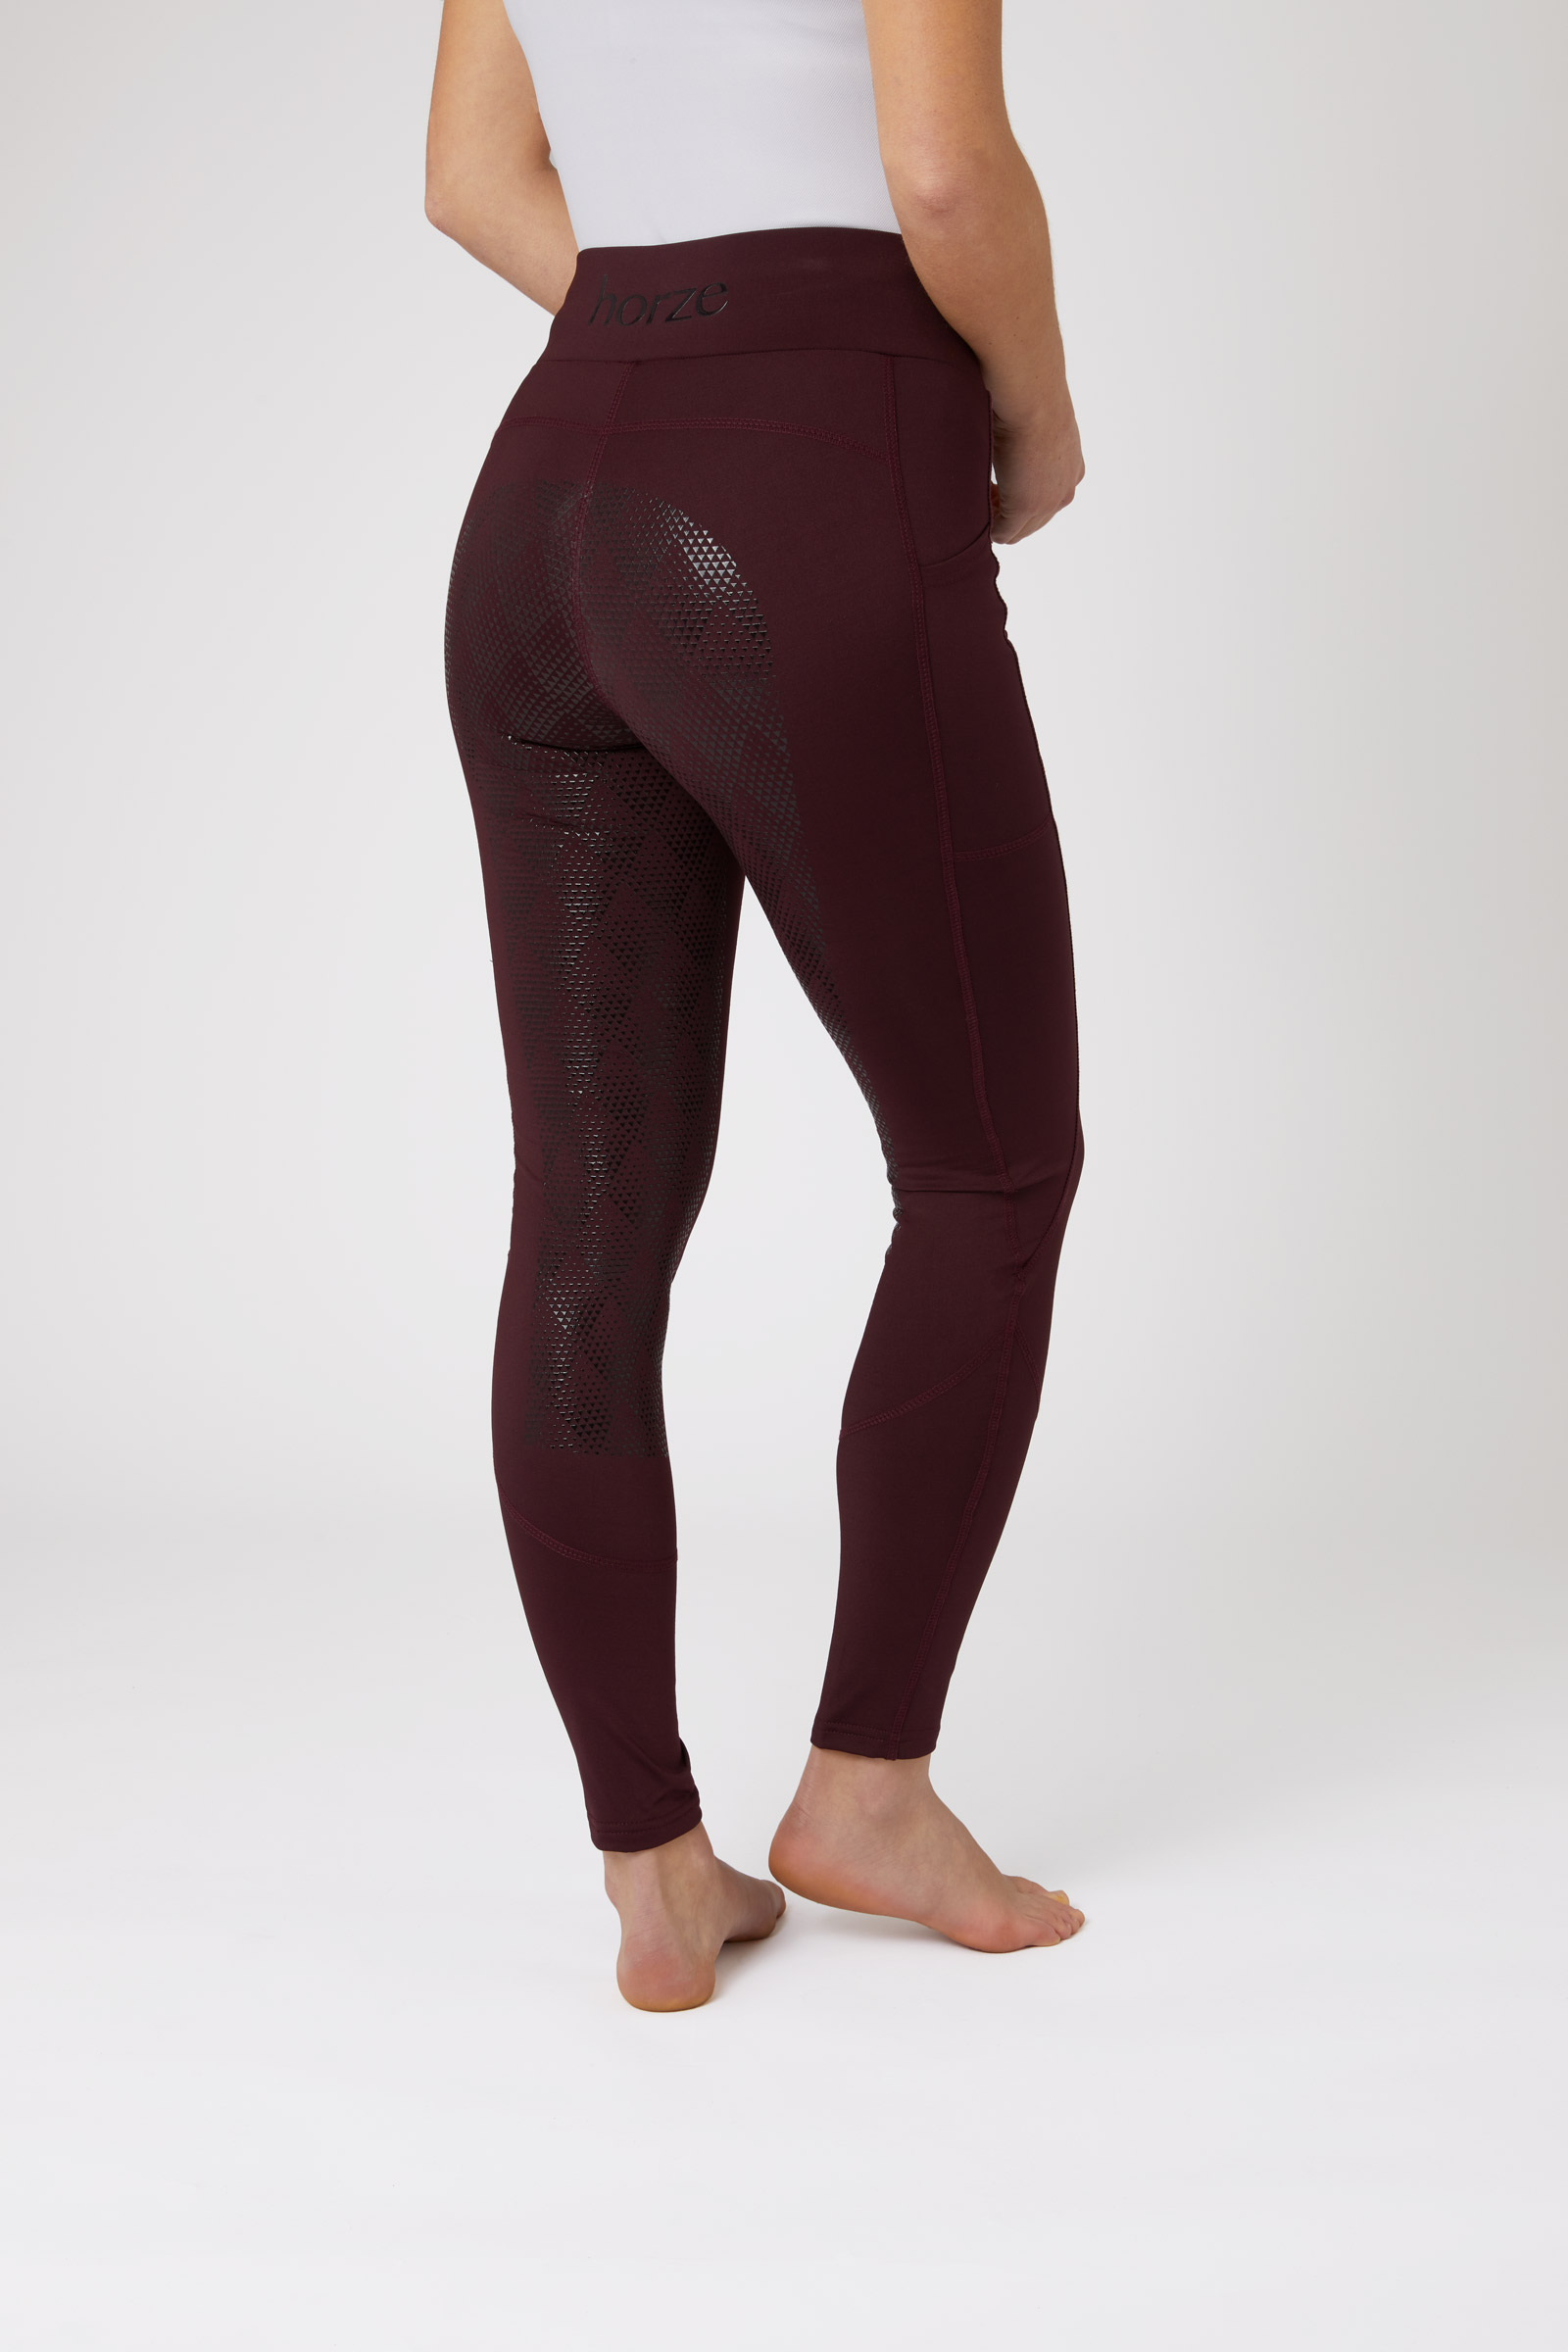 Horze Radiance Full Seat Tights - SALE